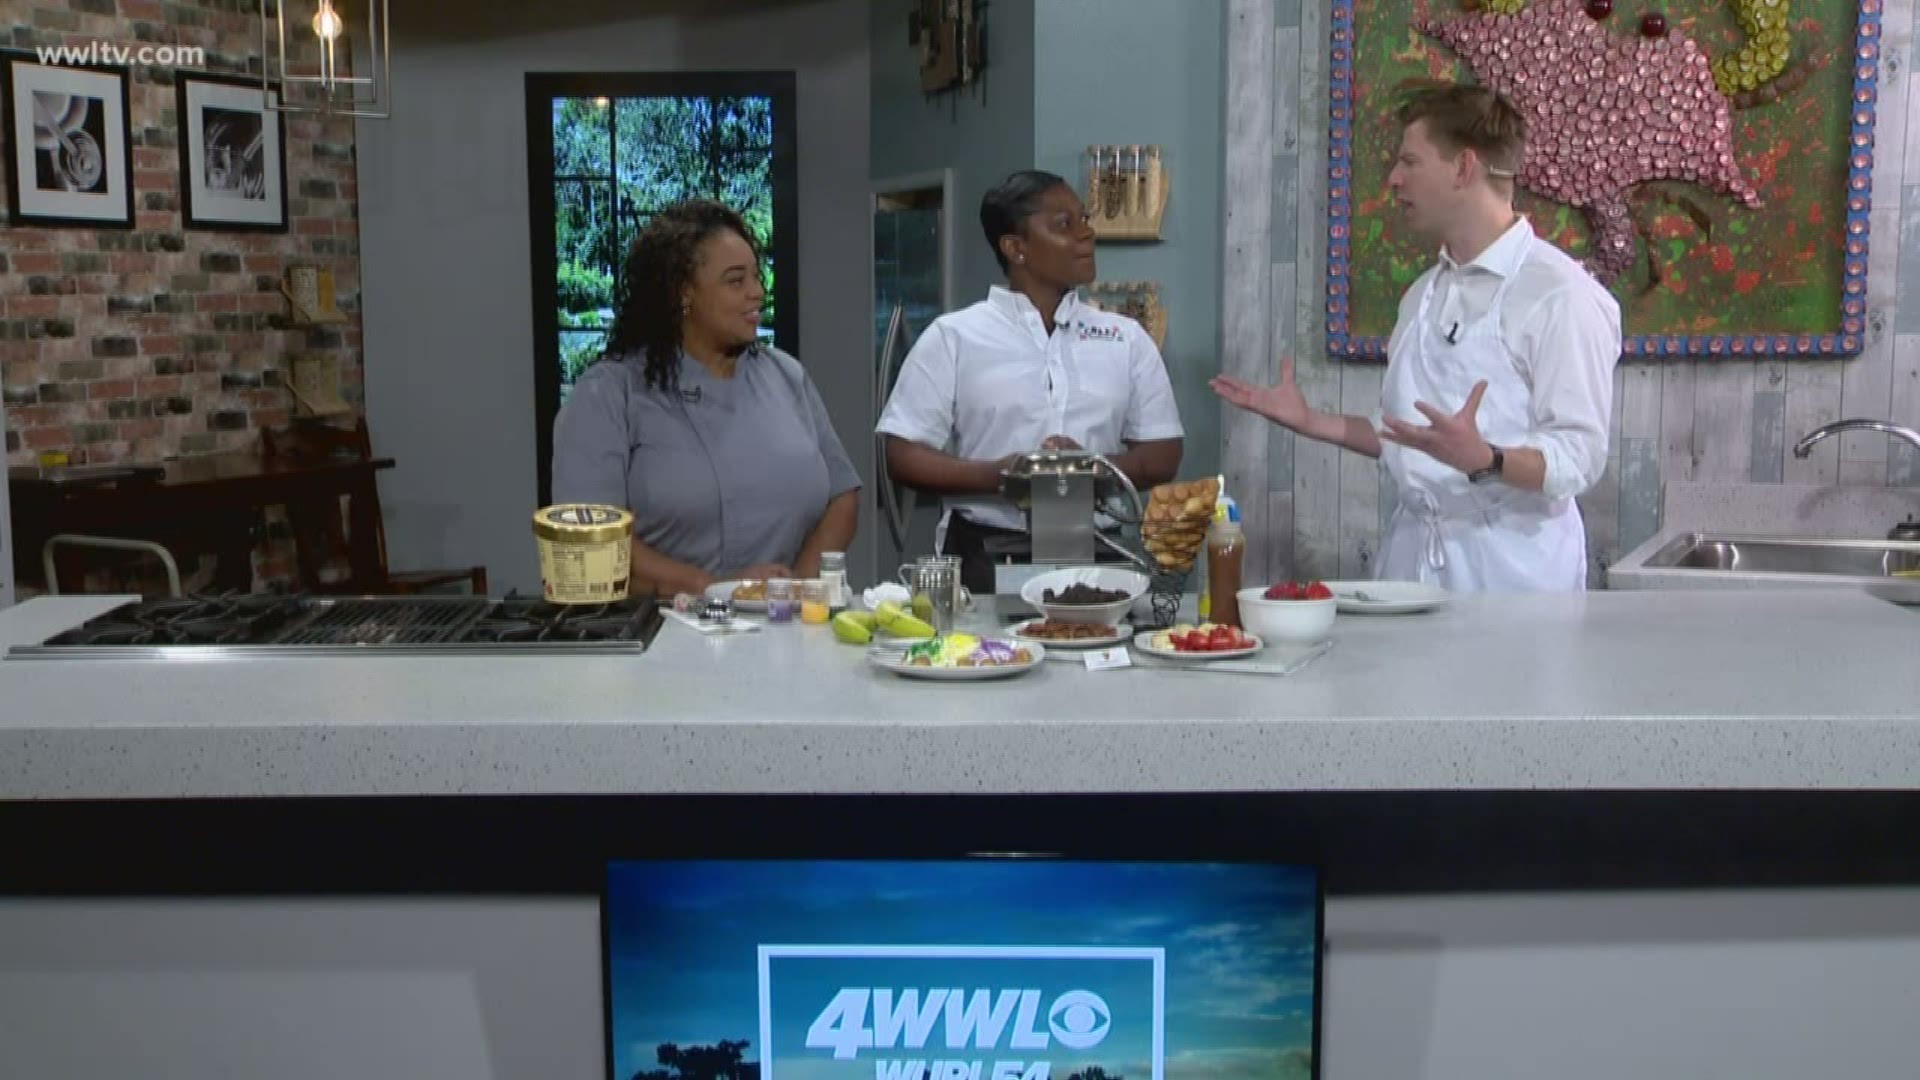 Paul Dudley & Chef Dee Lavigne learn how to make Hong Kong waffles and other creative waffles with Sinnidra Taylor from Crazy Waffle Bar - www.Crazywafflebar.com